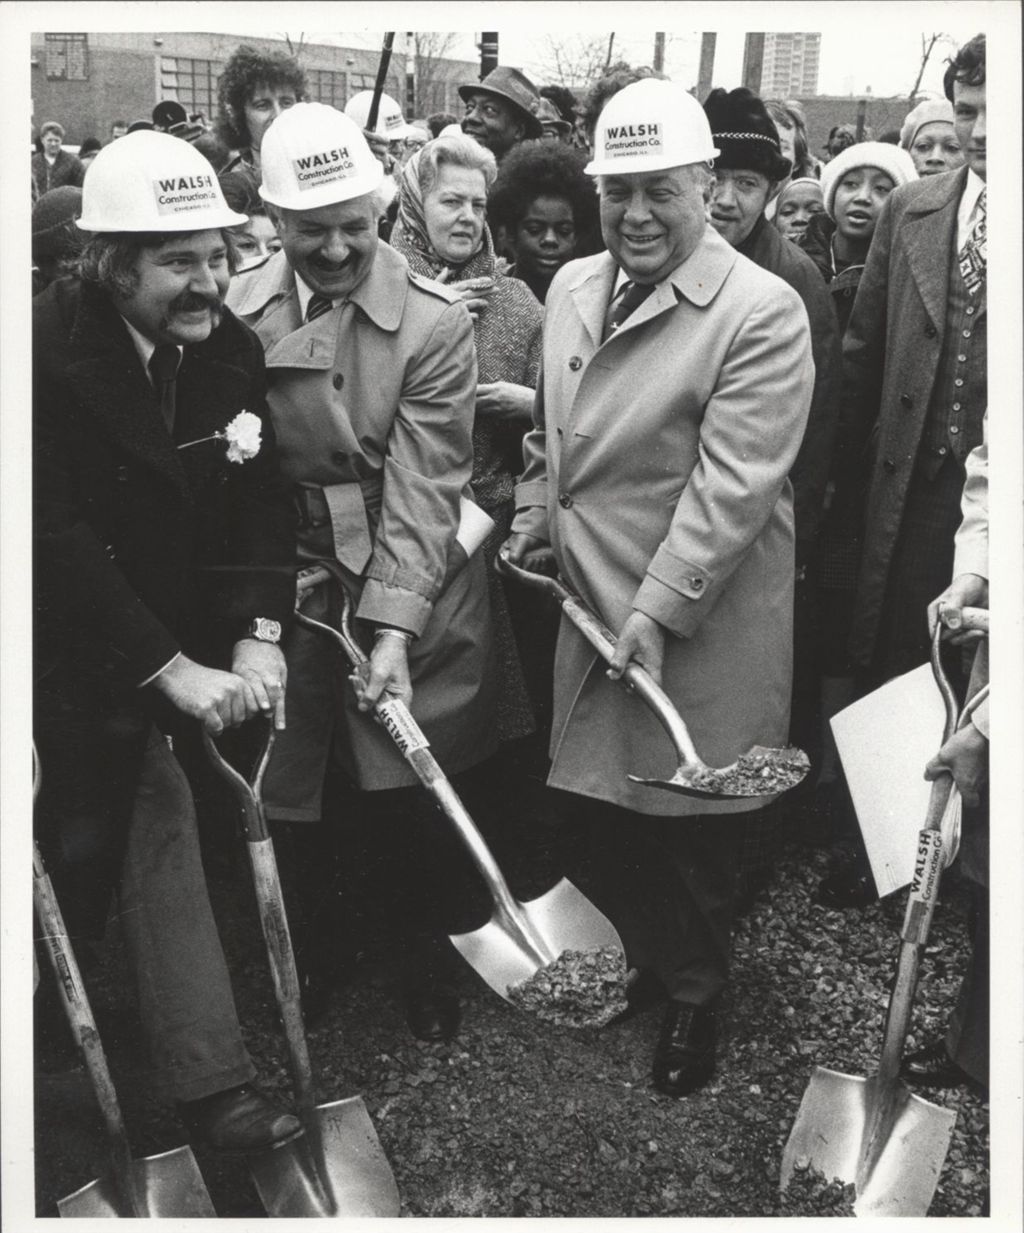 Miniature of Richard J. Daley with others at Library for the Blind groundbreaking ceremony